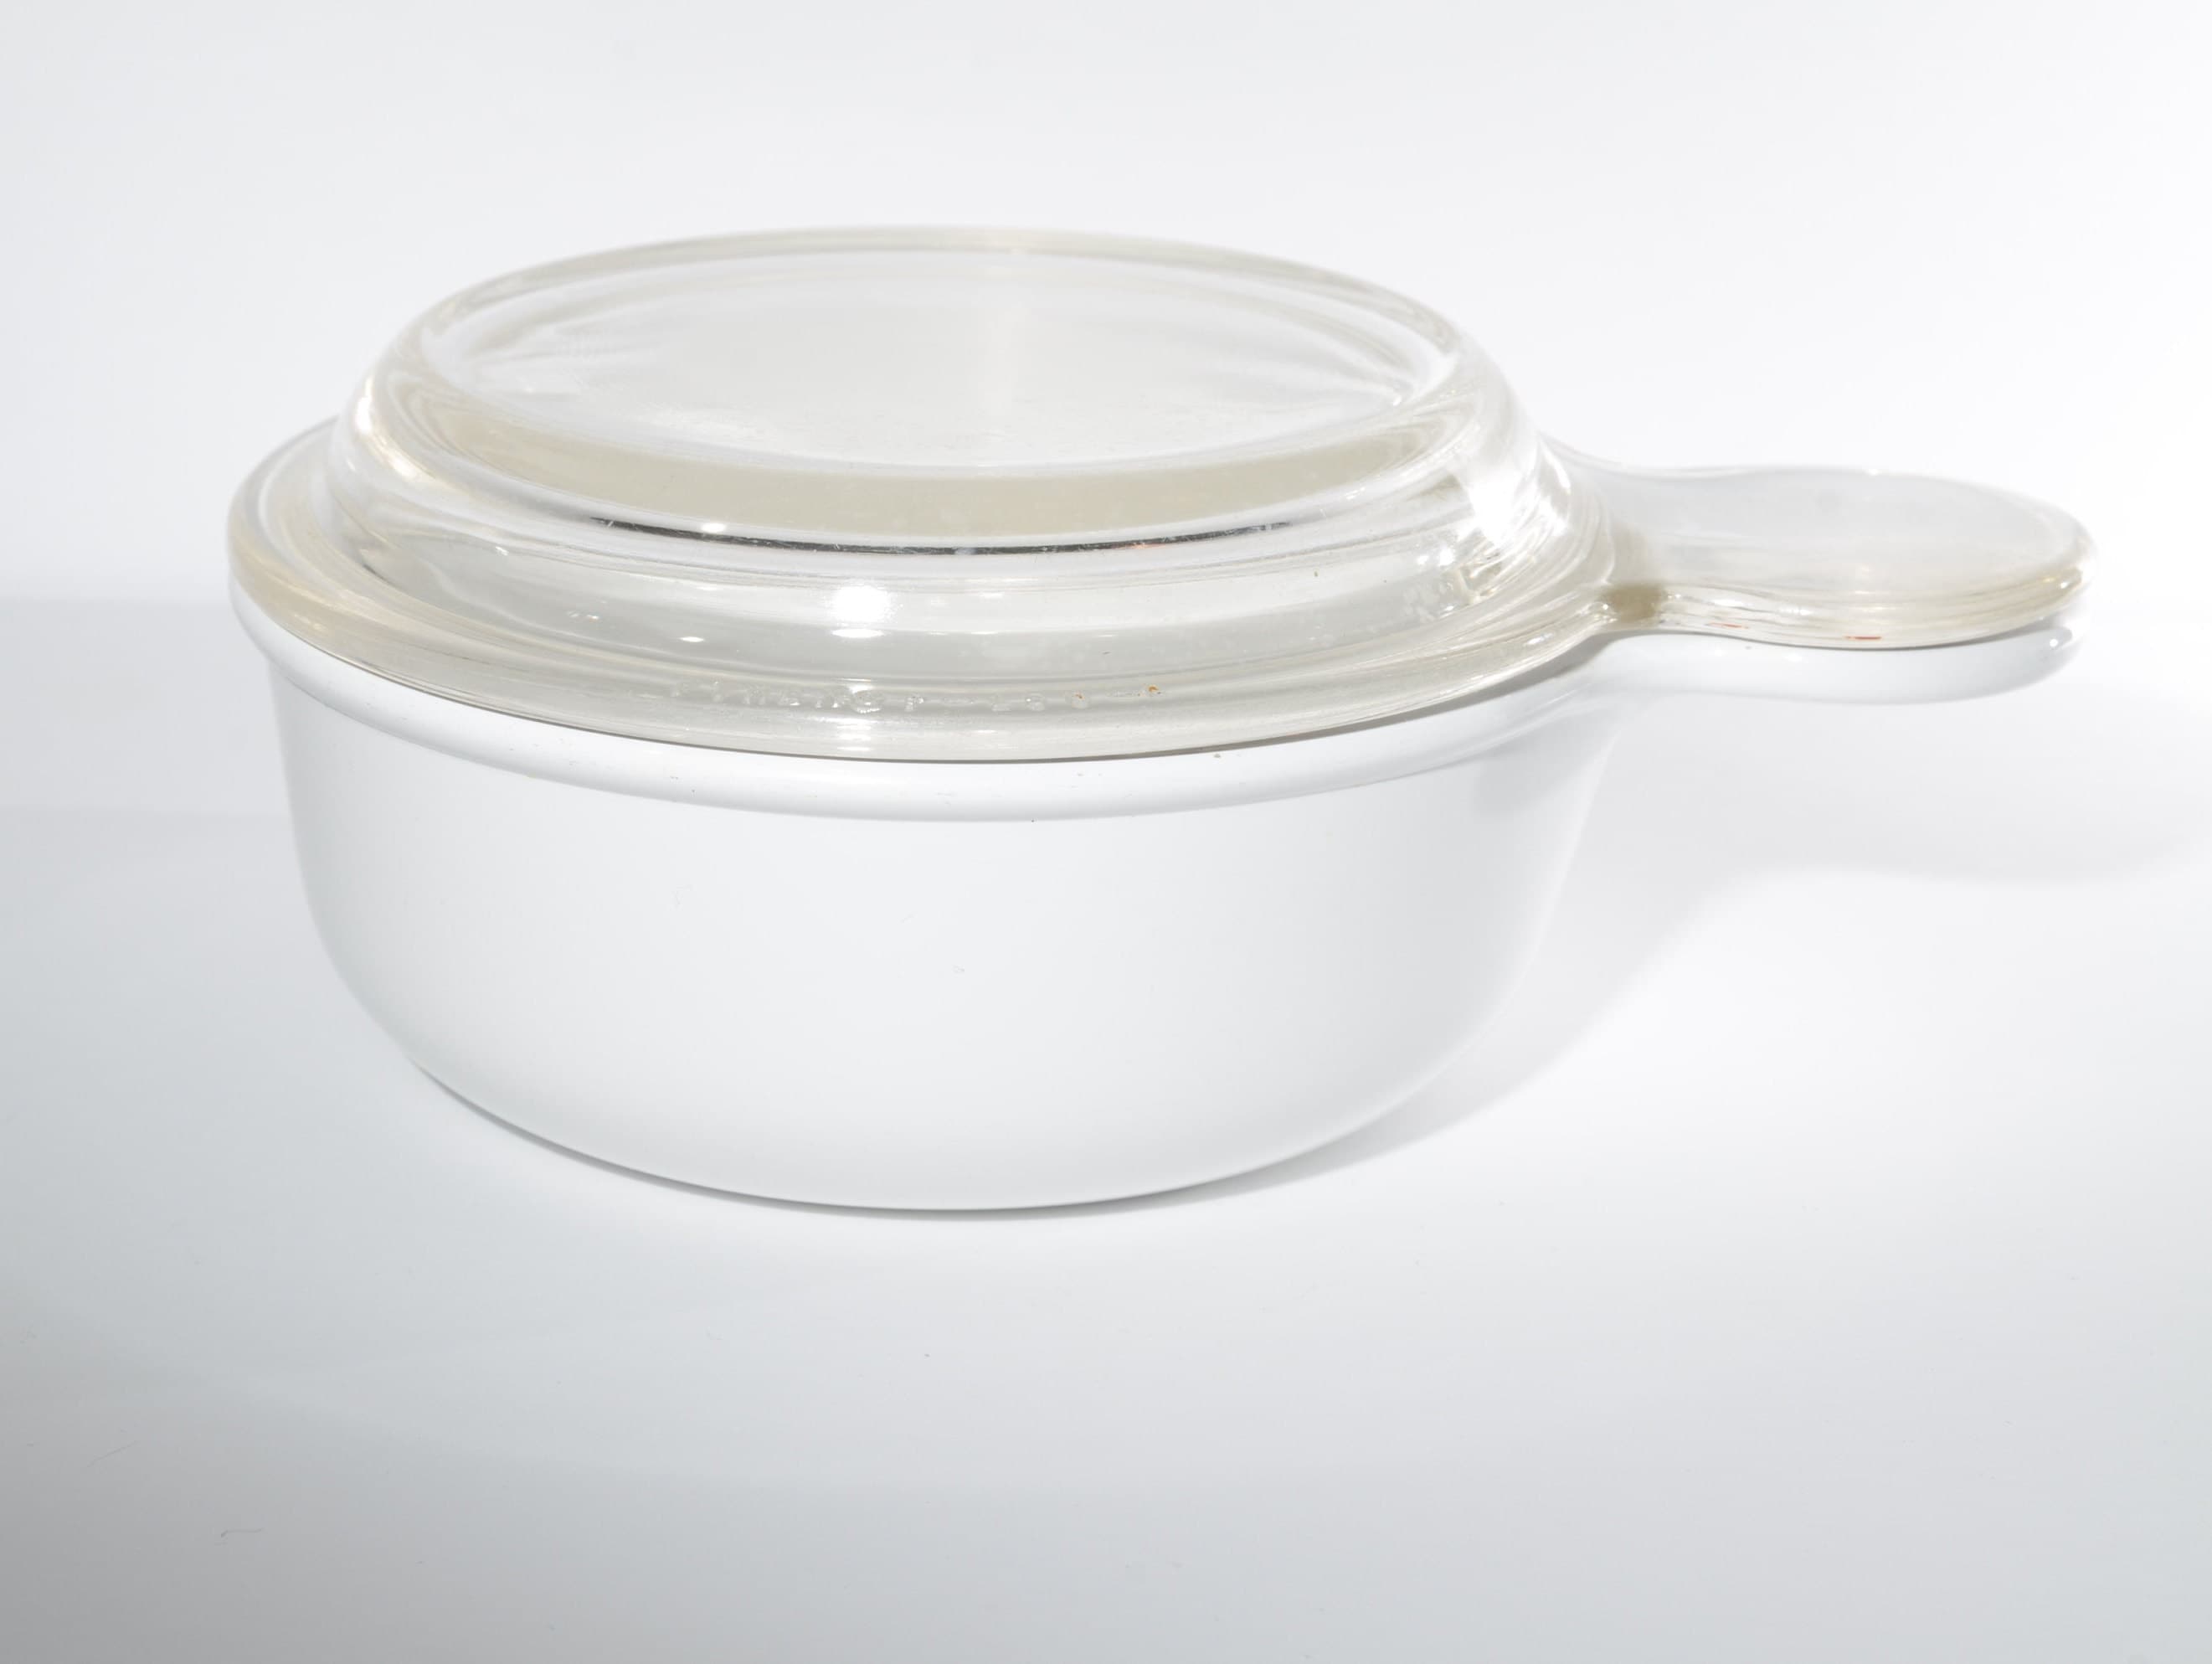 Corning Ware Grab It Casserole Pyrex Clear Glass Replacement Lid [P150C NM  glass lid only] - $12.95 : Classic Kitchens And More, Authentic Retro  Kitchenware